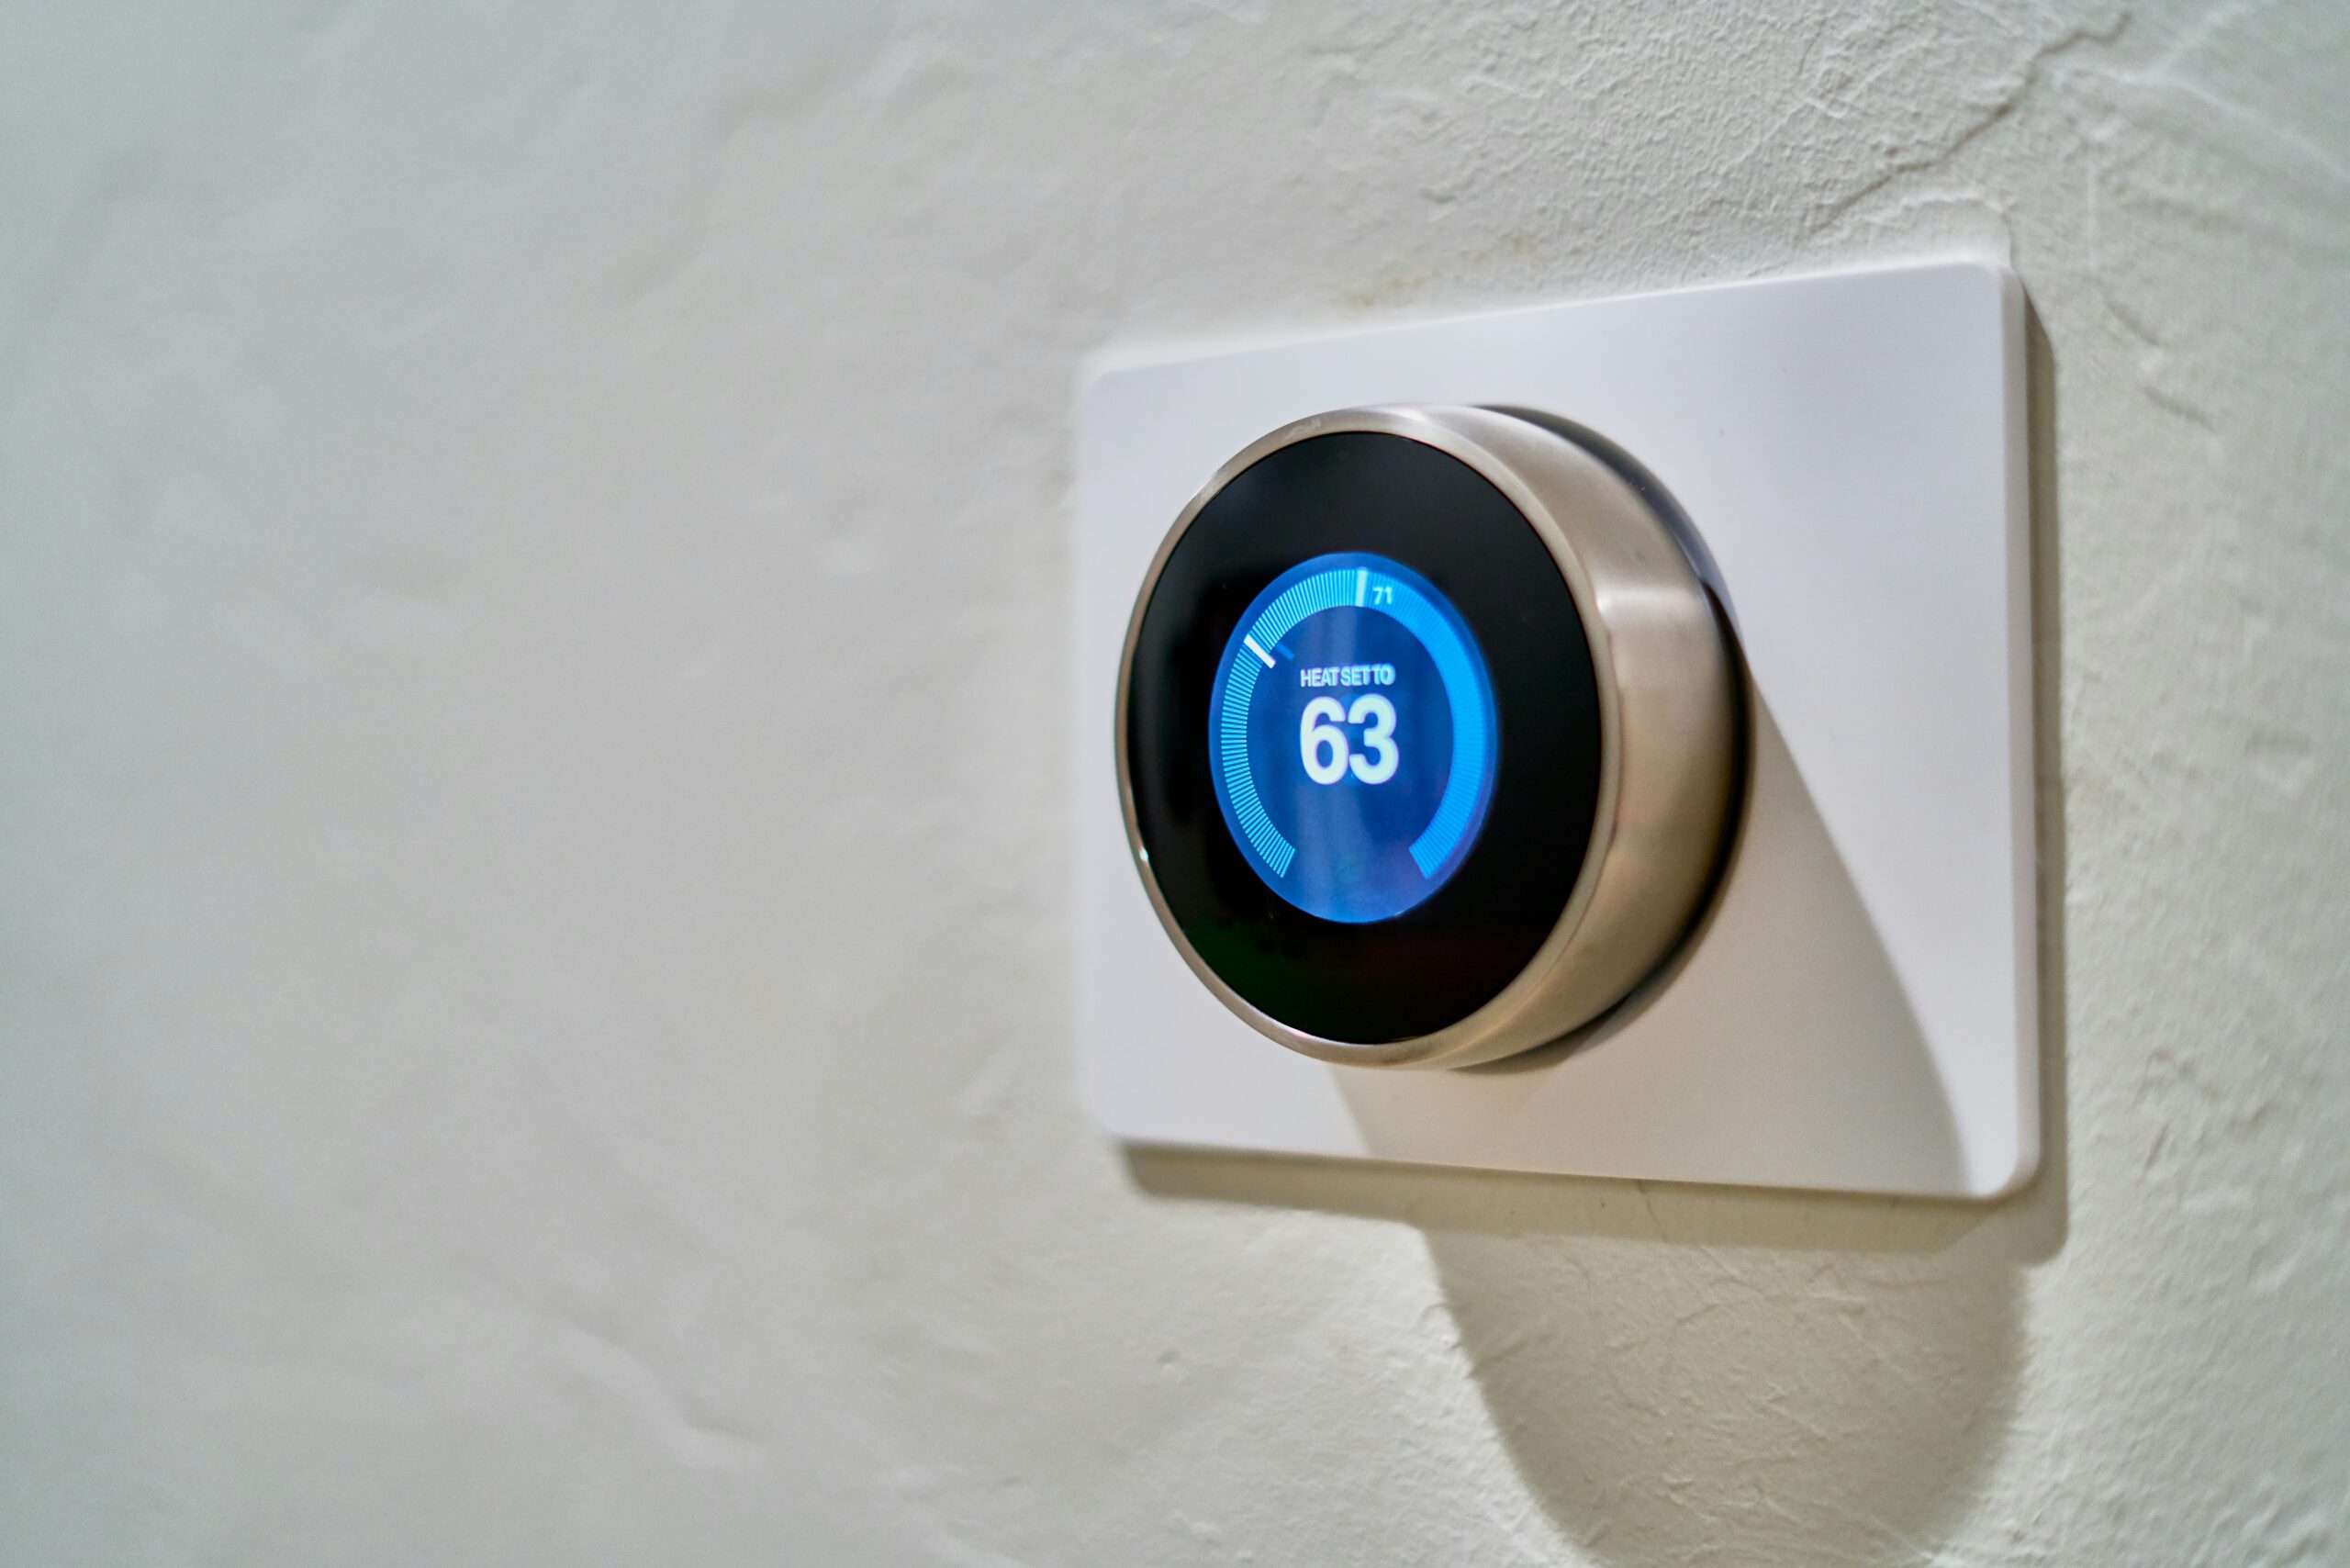 Smart thermostat displaying temperature control options on a digital screen